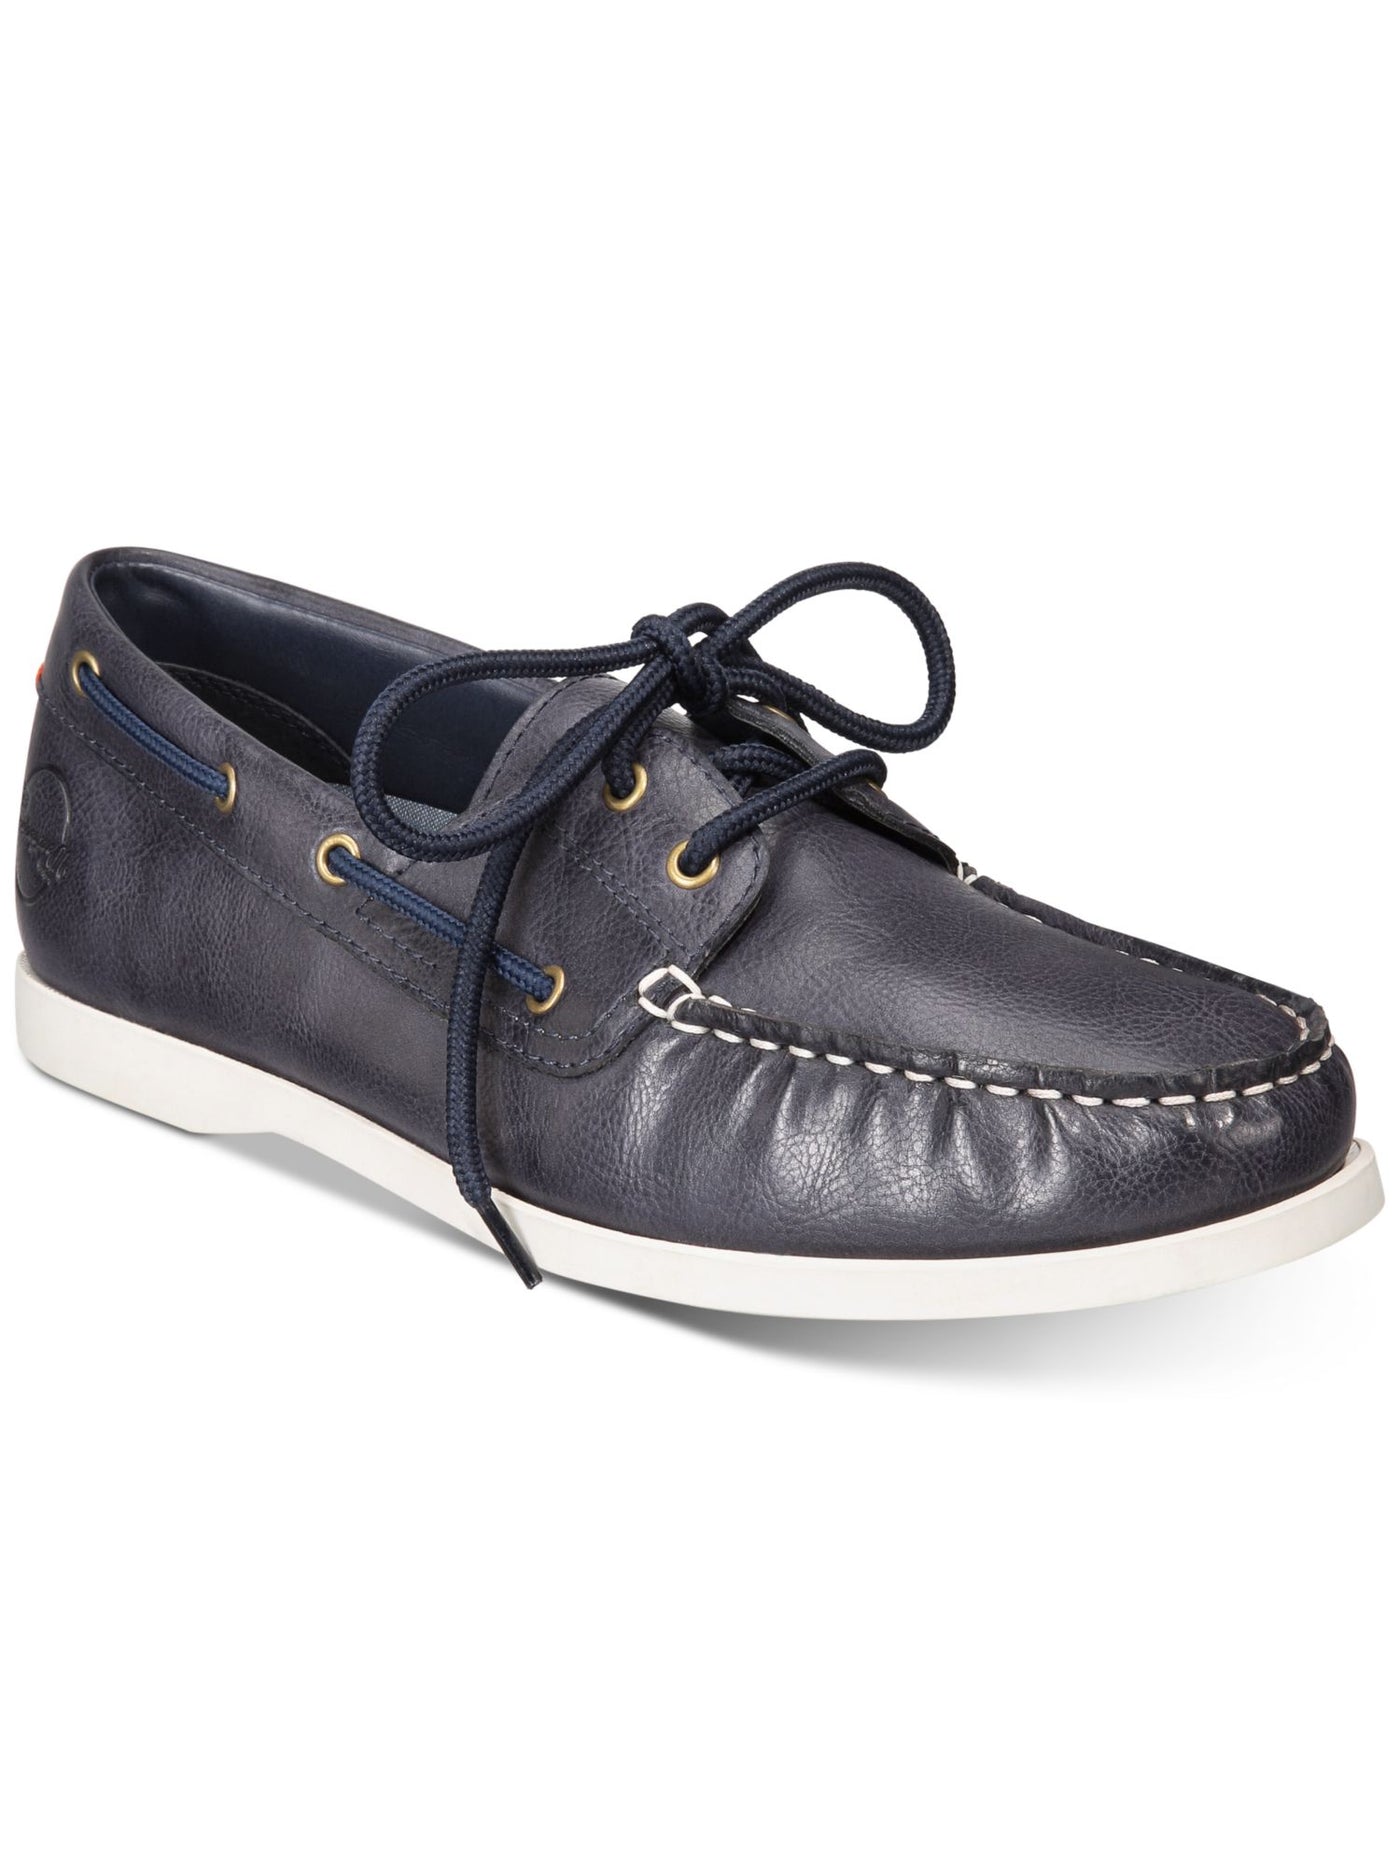 WEATHERPROOF VINTAGE Mens Navy Cushioned Benny Round Toe Lace-Up Boat Shoes 9 M